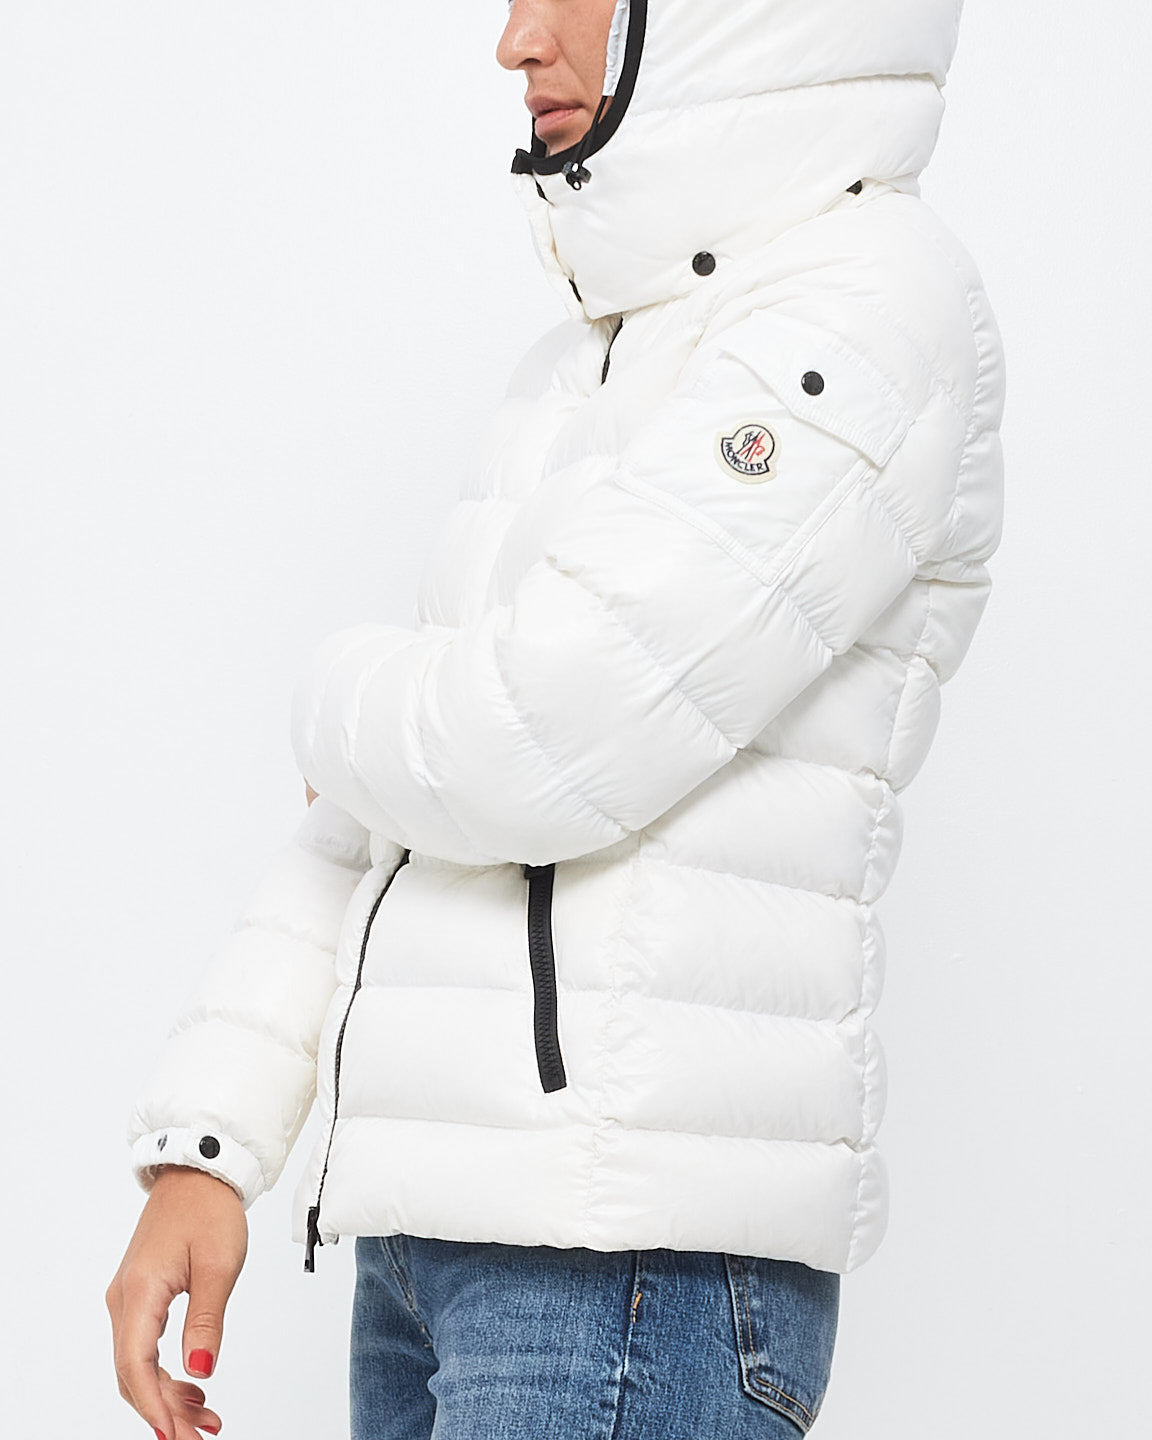 Moncler White With Black Trimming Bady Short Down Jacket Puffer - 2